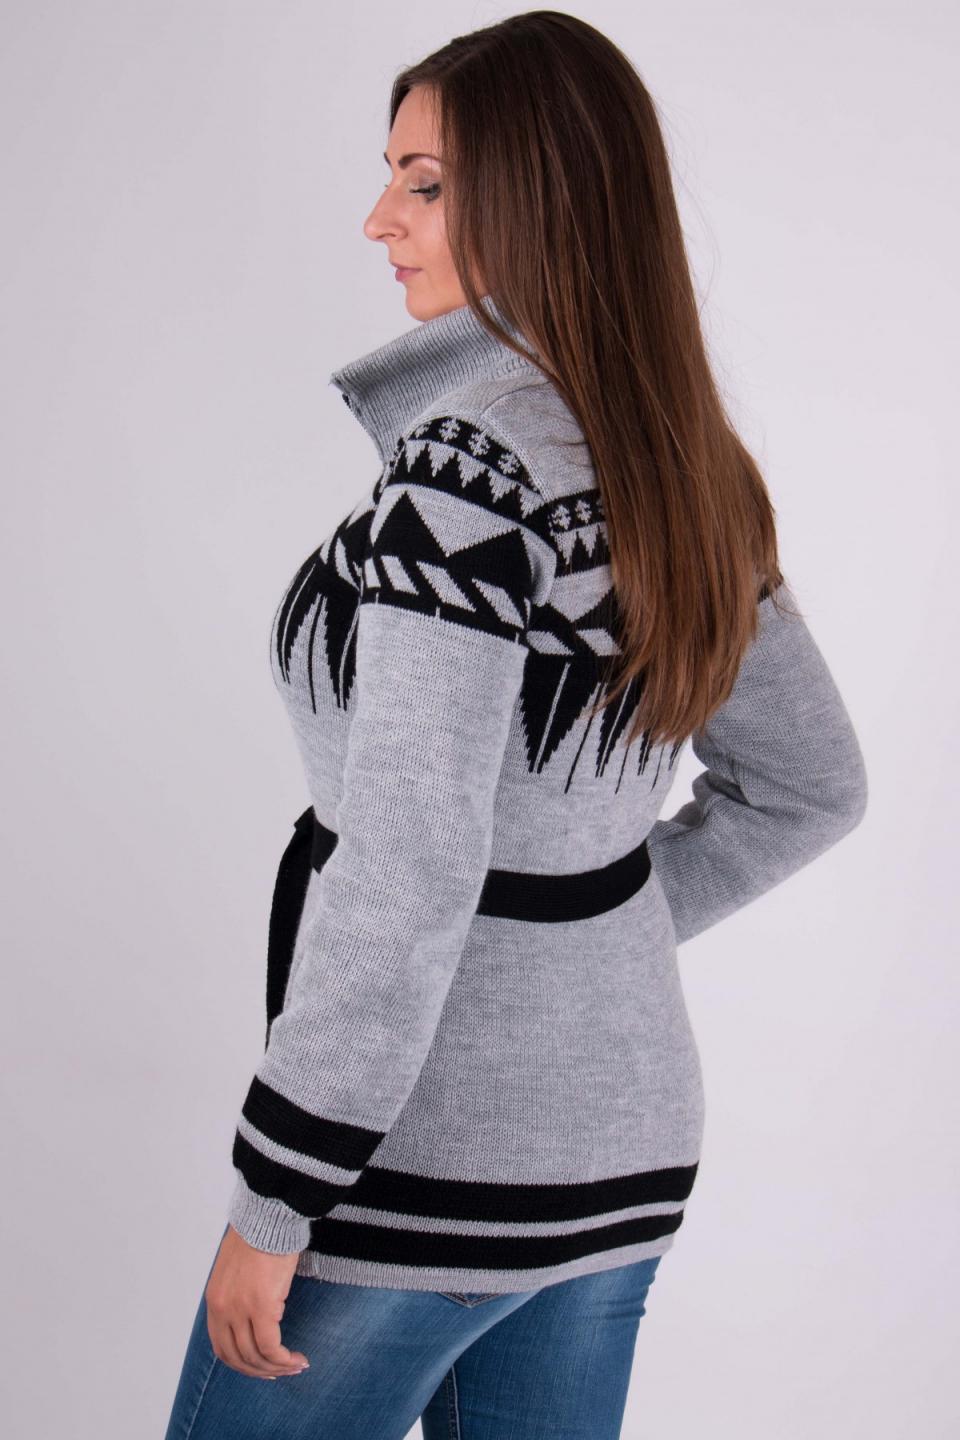 Knitted sweater with a zipper &quot;Toffee&quot; (gray, black)